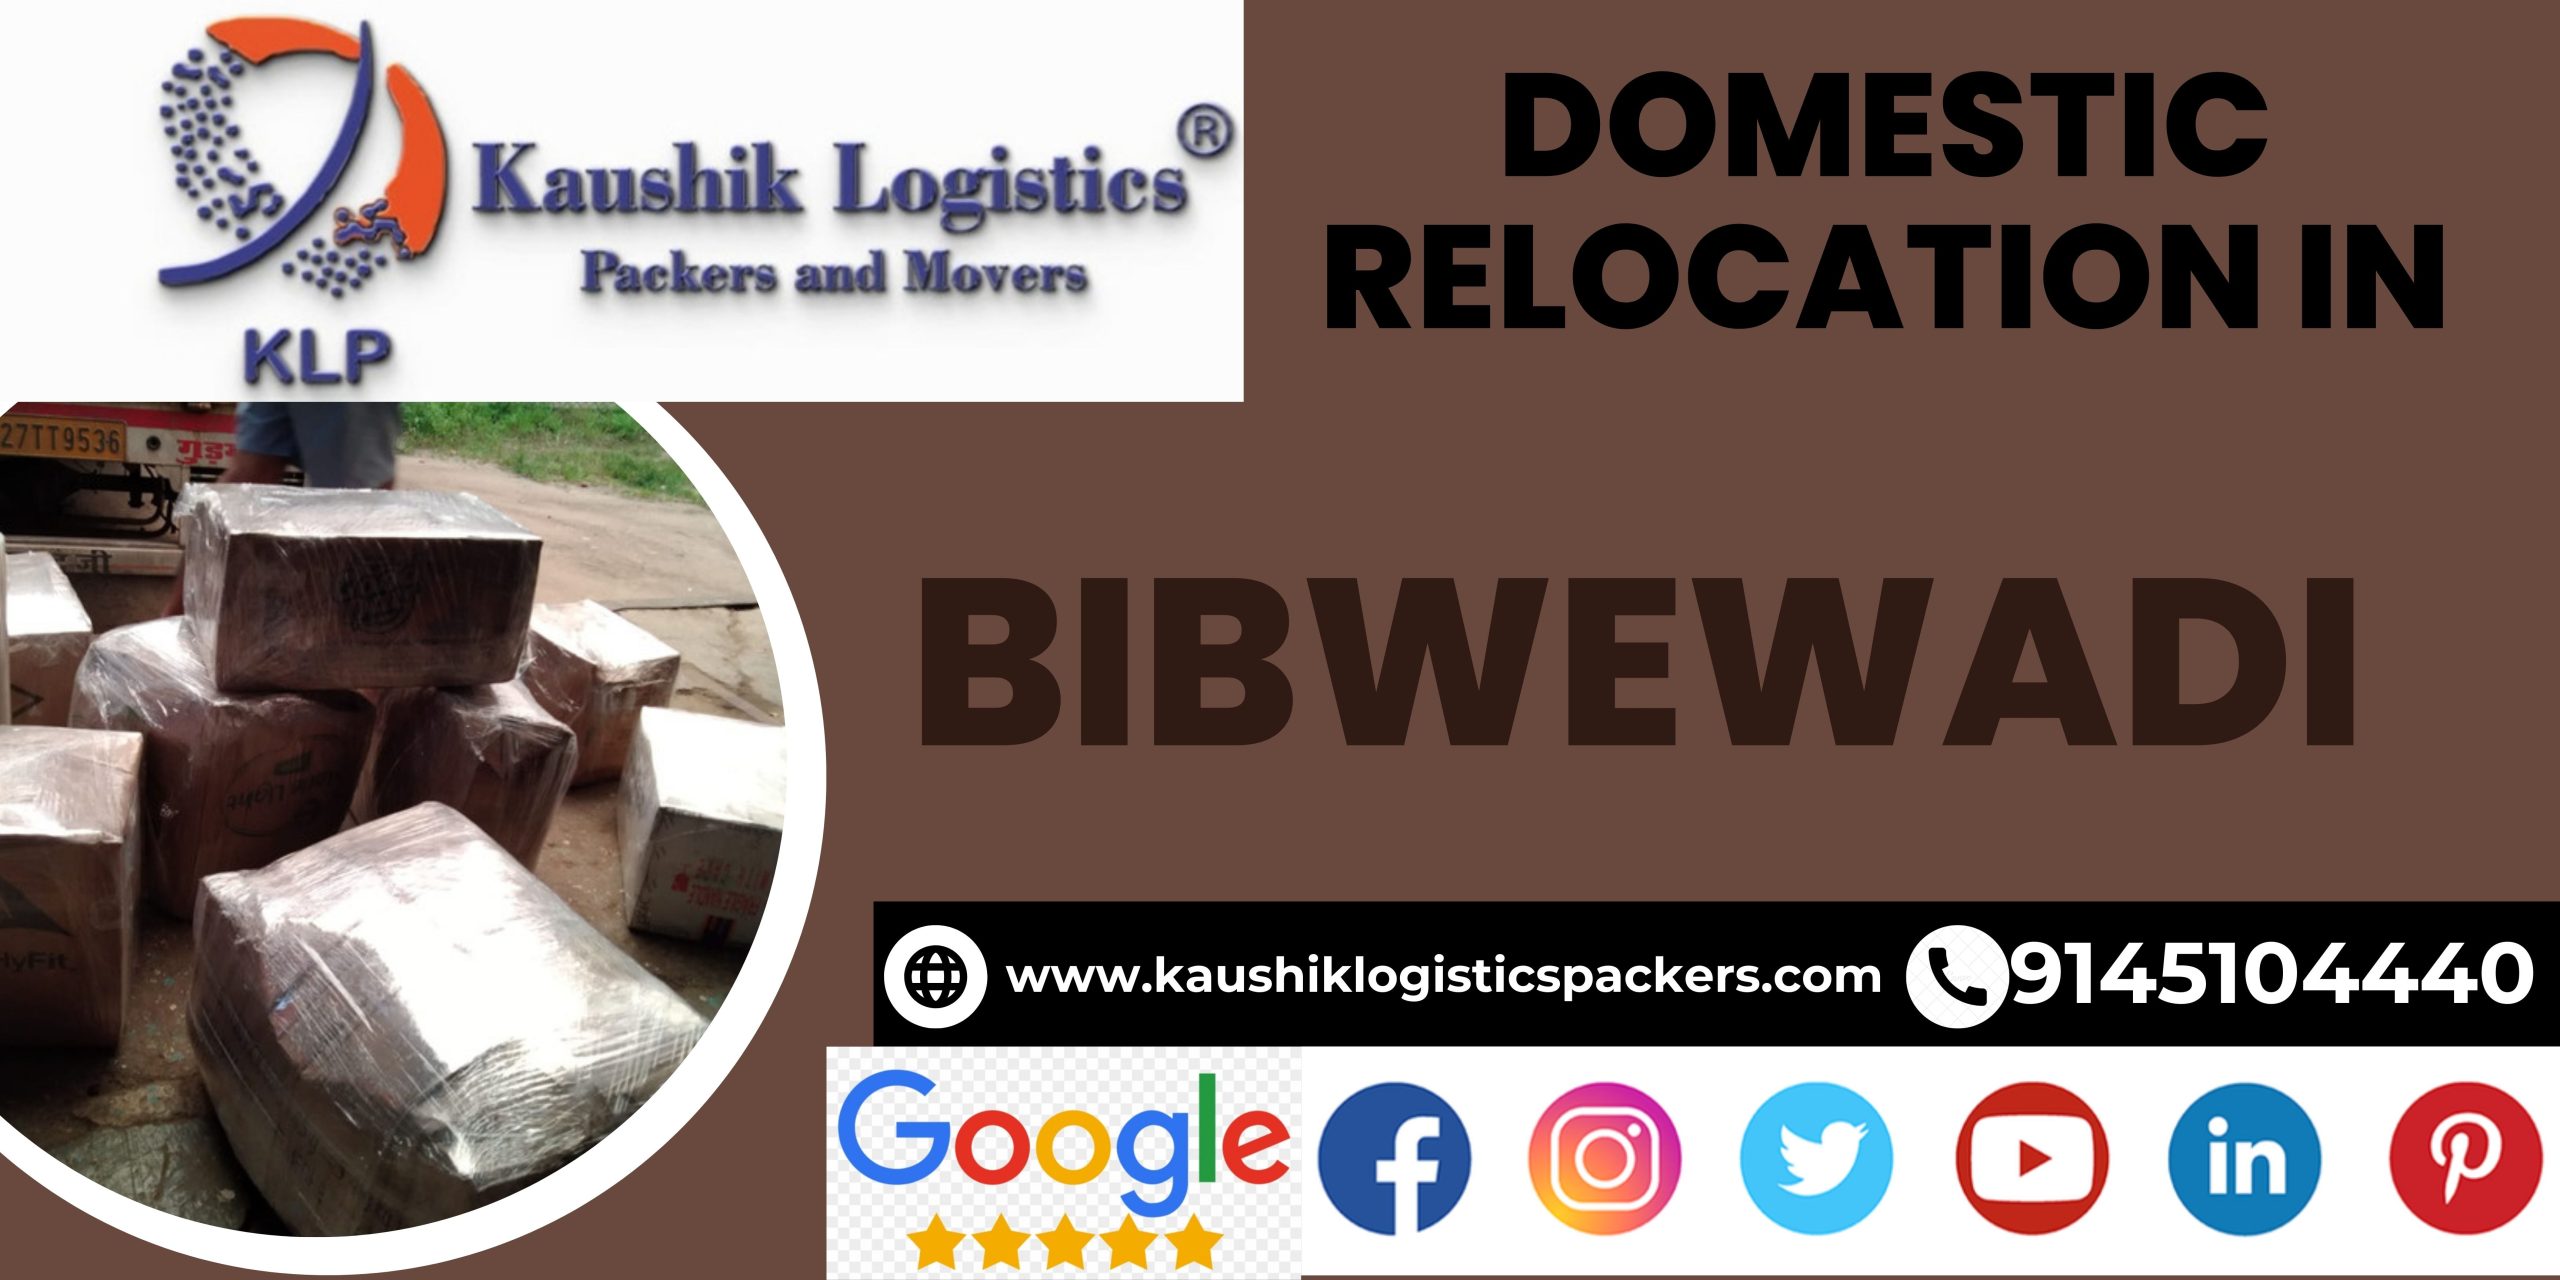 Packers and Movers In Bibwewadi